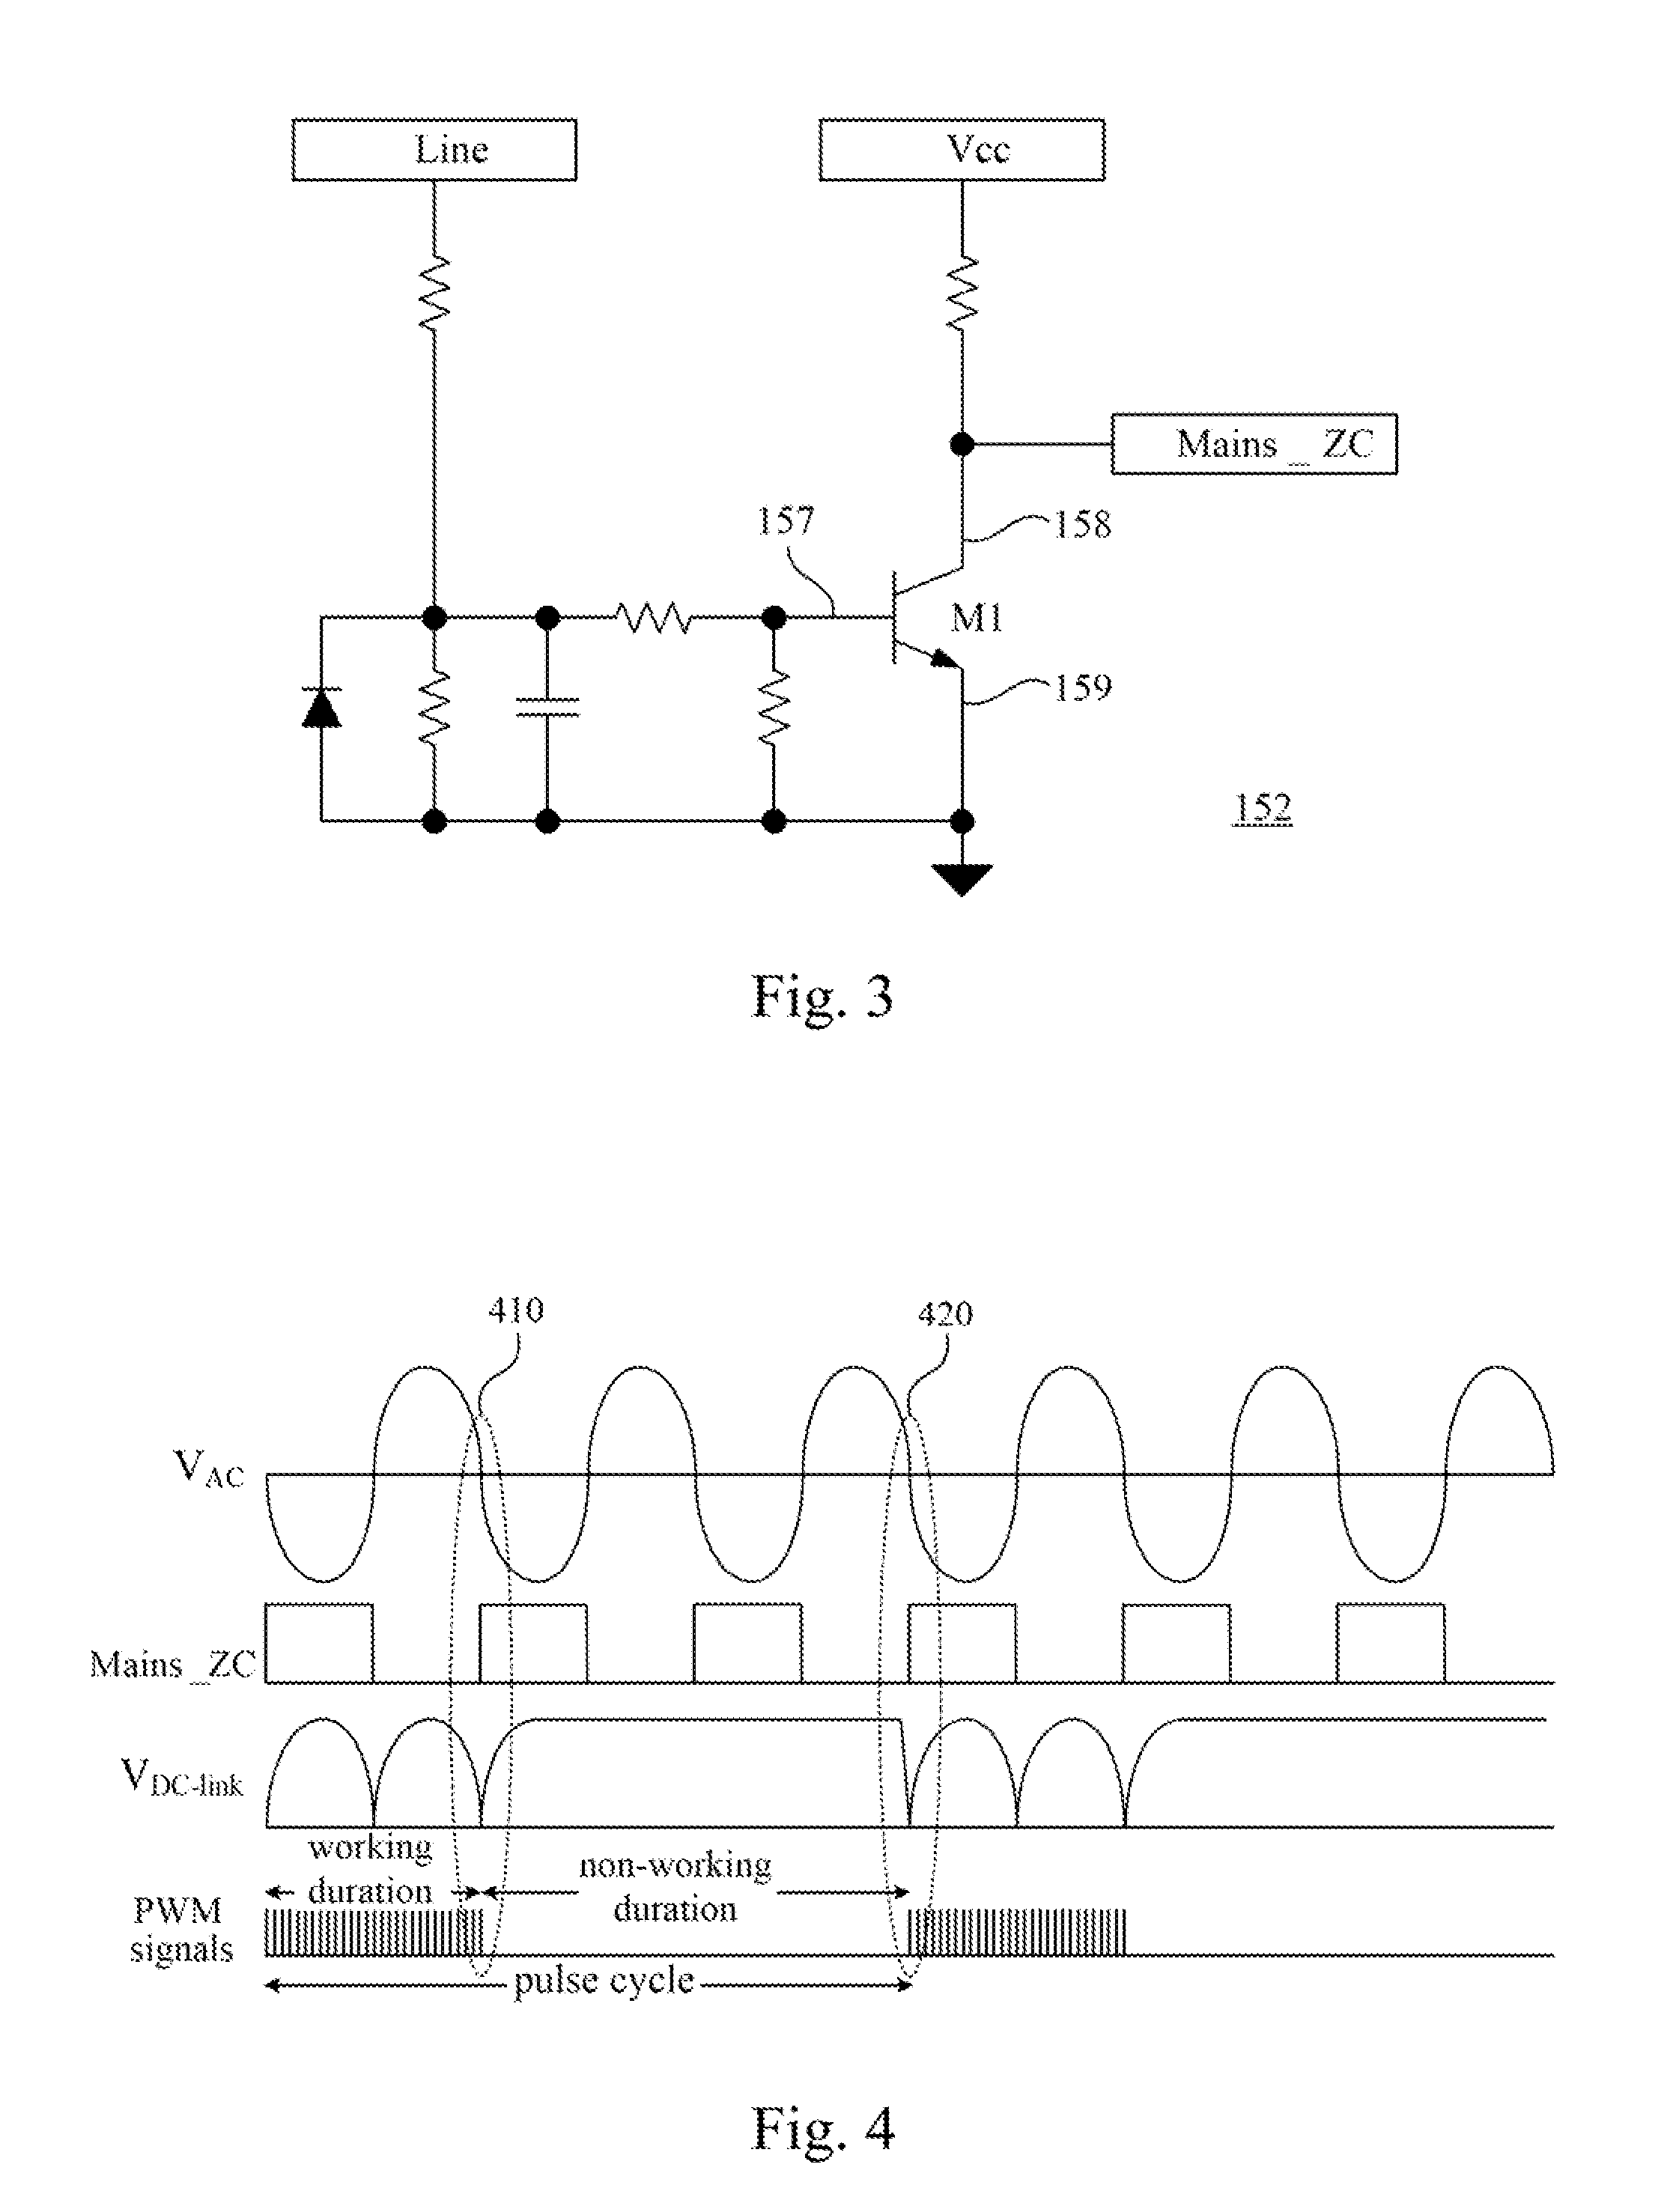 System and method for controlling quasi-resonant inverter and electric heating device employing the same